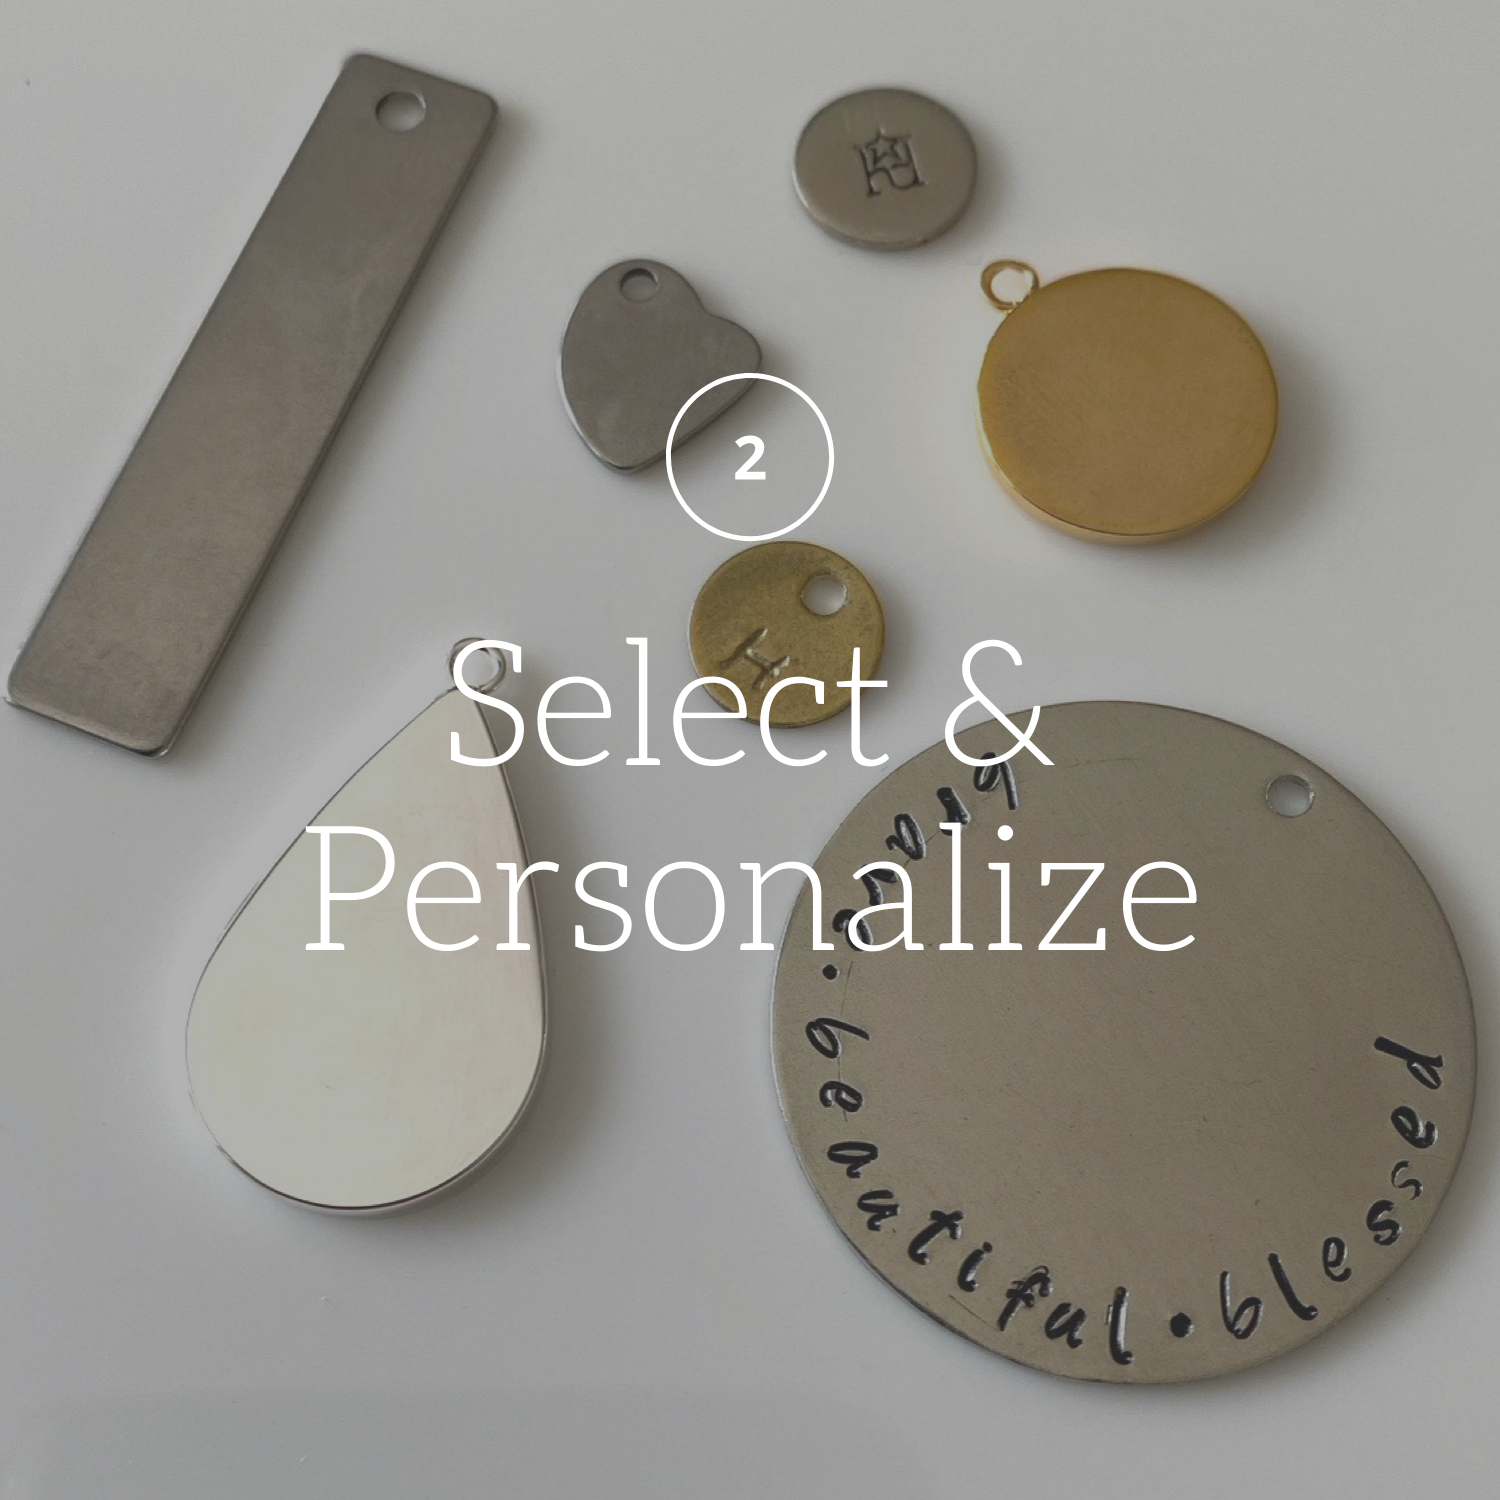 Step 2: Select & Personalize